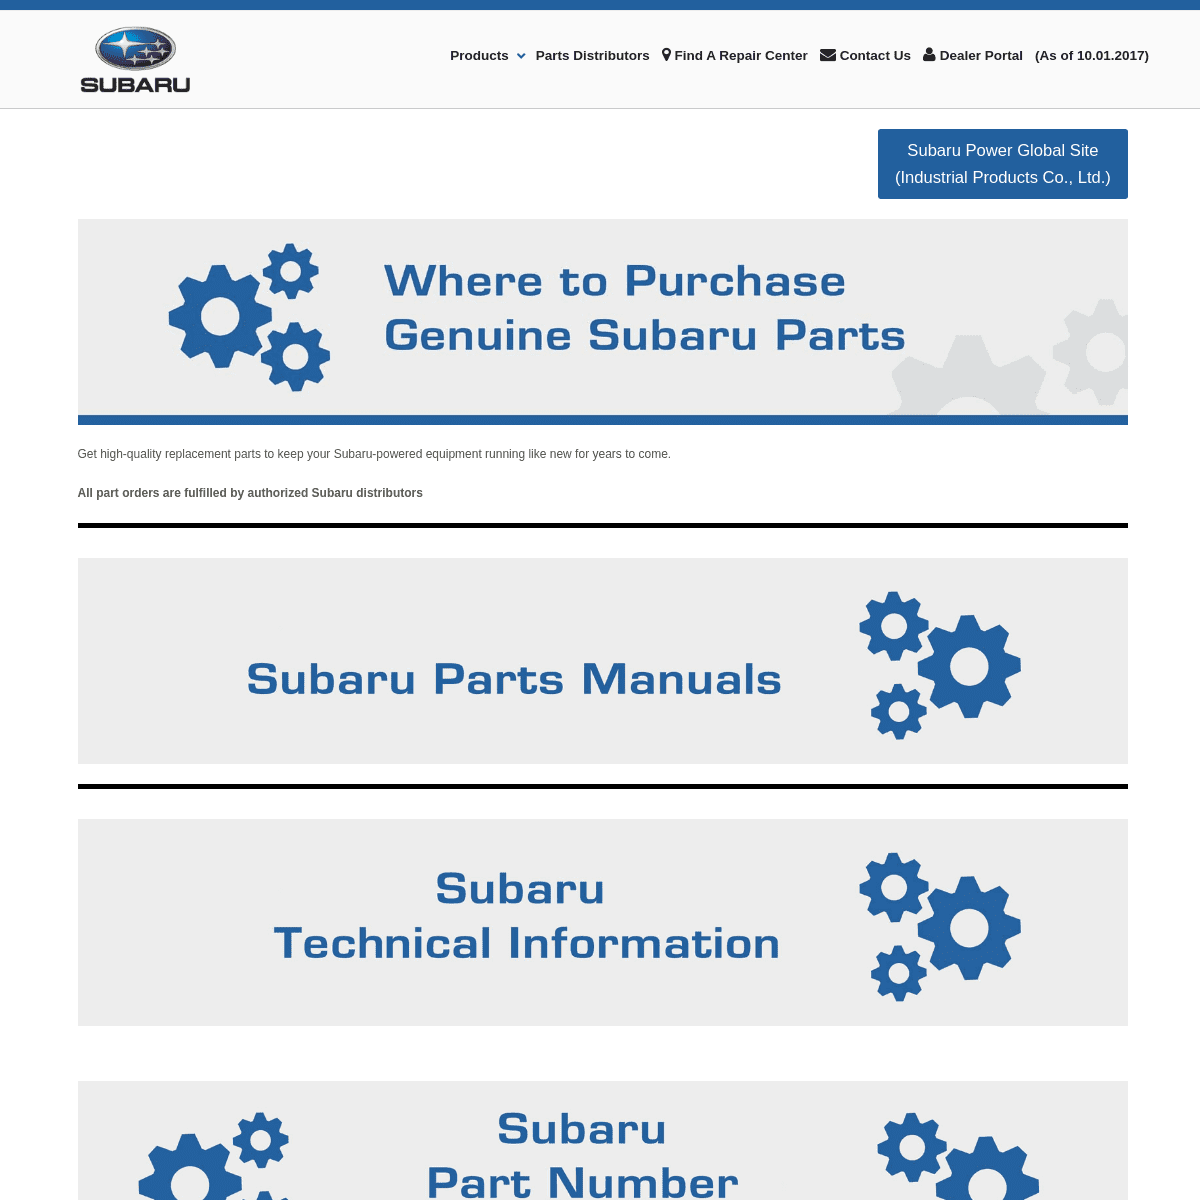 A complete backup of https://subarupower.com